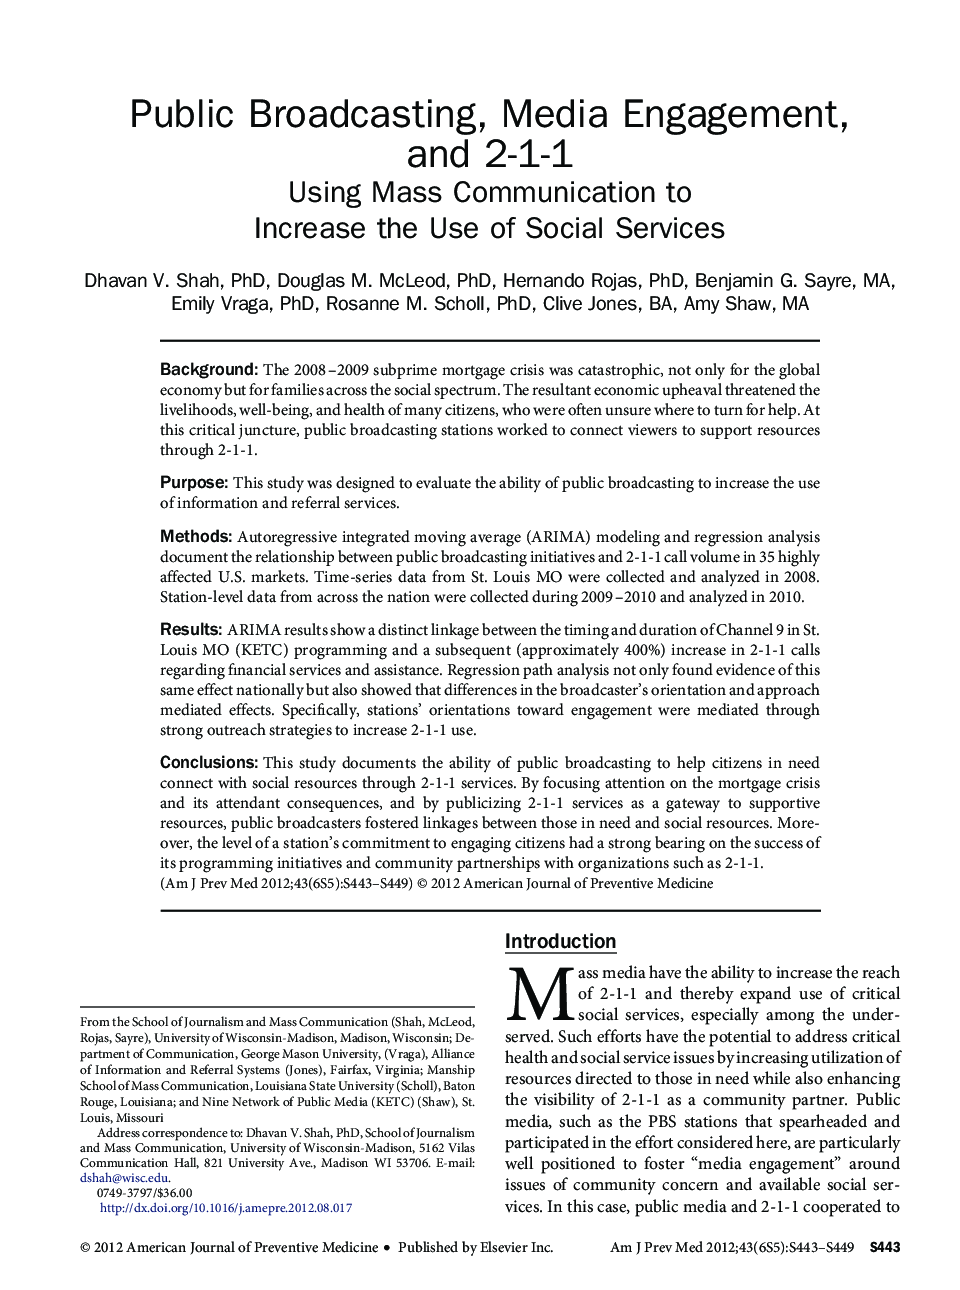 Public Broadcasting, Media Engagement, and 2-1-1: Using Mass Communication to Increase the Use of Social Services